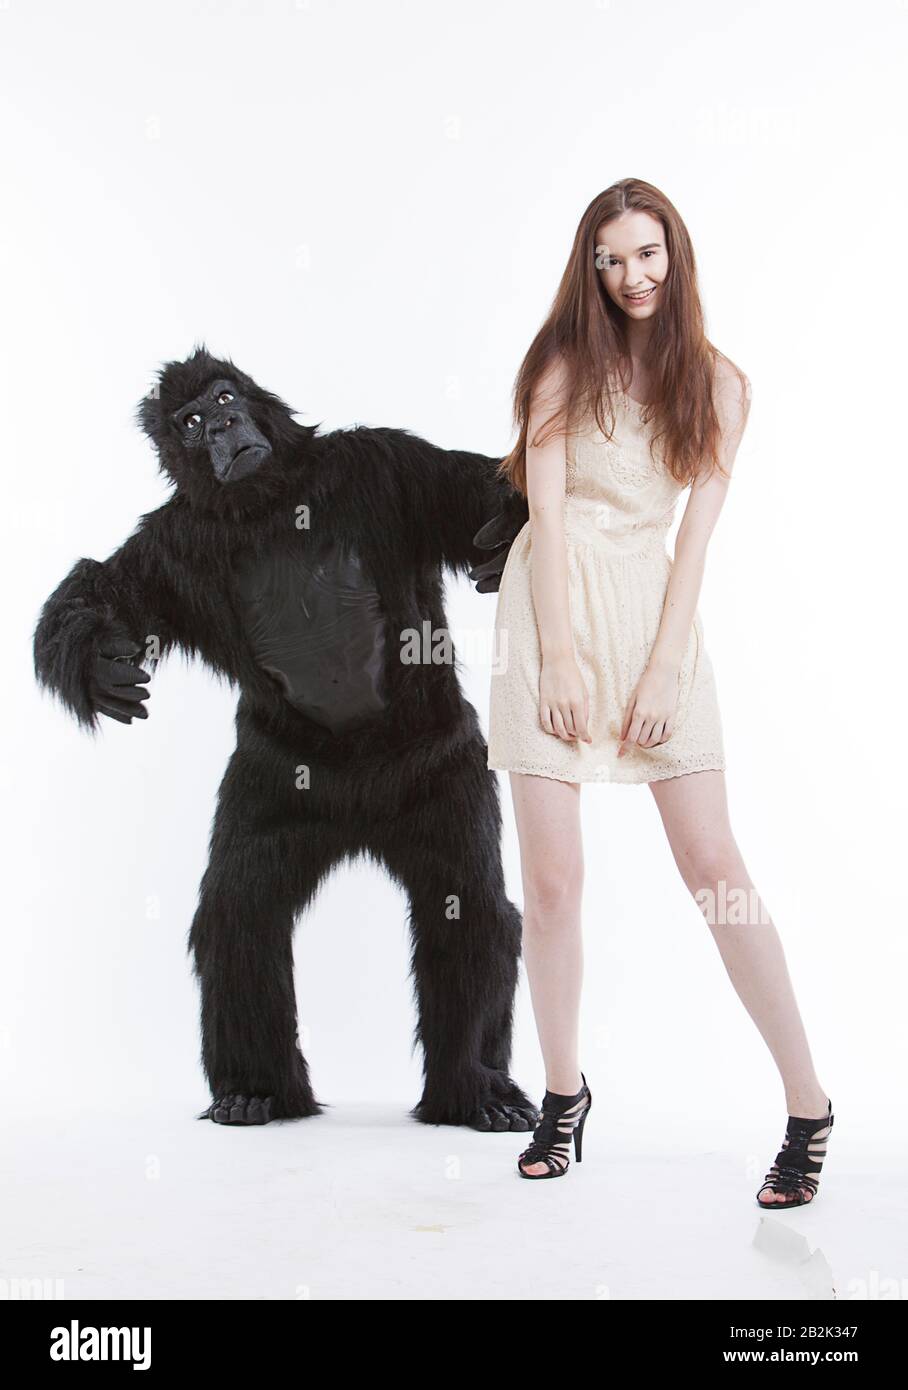 Portrait of smiling young woman with man in gorilla costume against white background Stock Photo